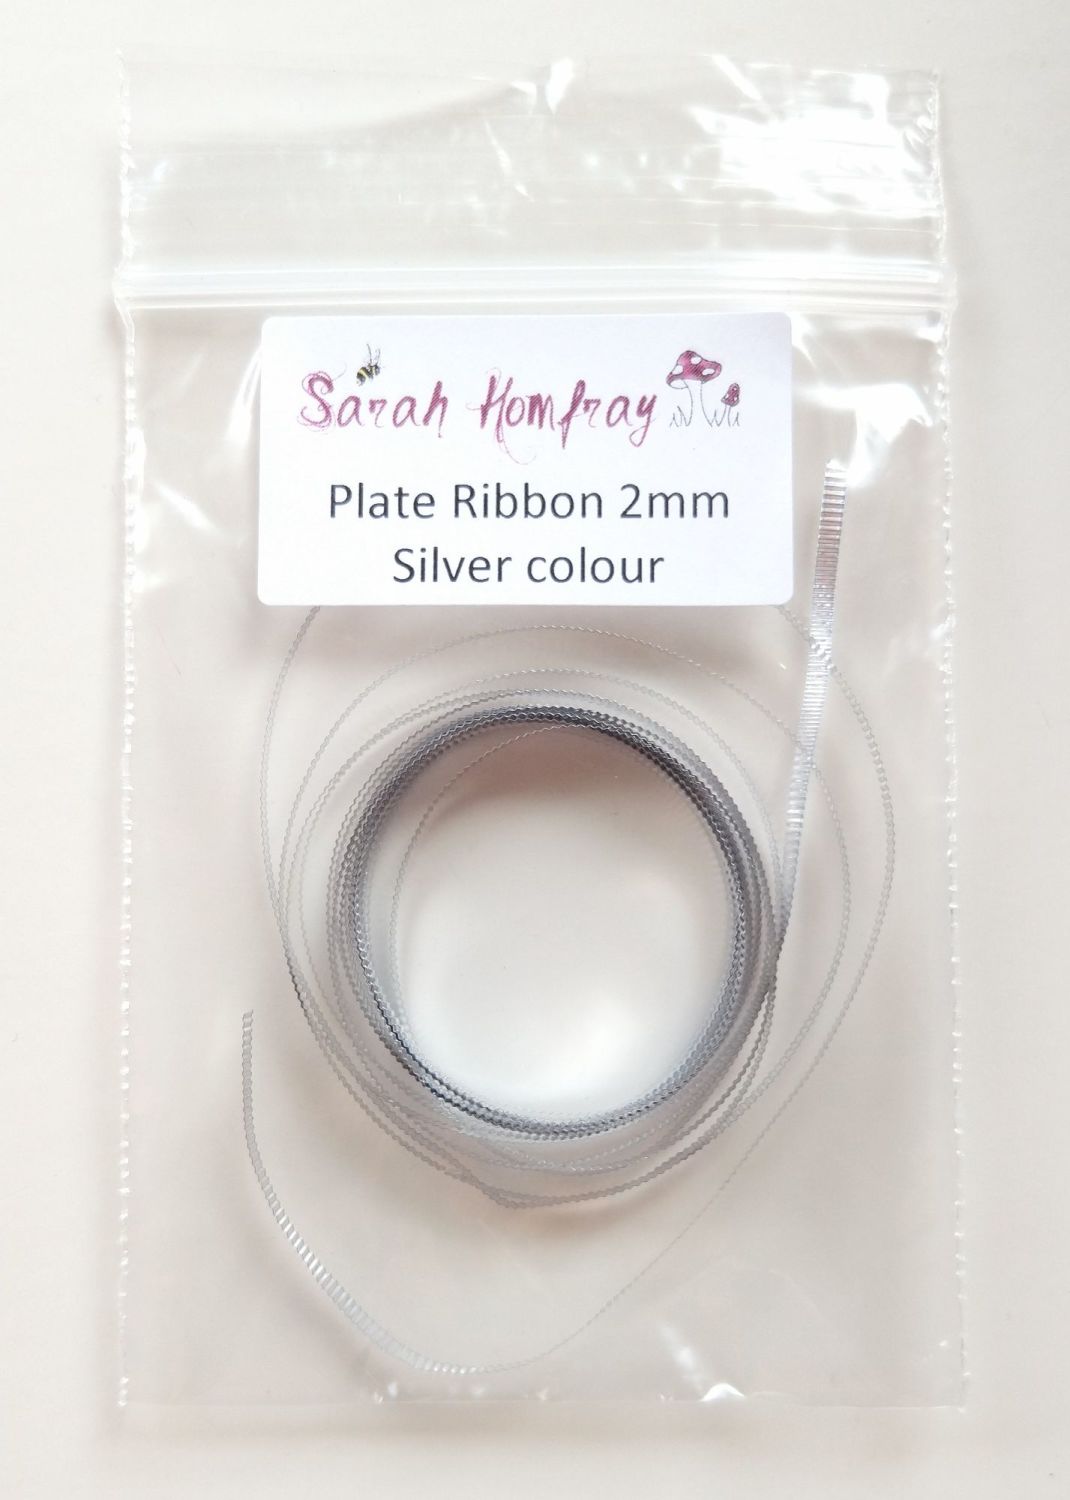 Plate ribbon - silver colour ribbed 2mm